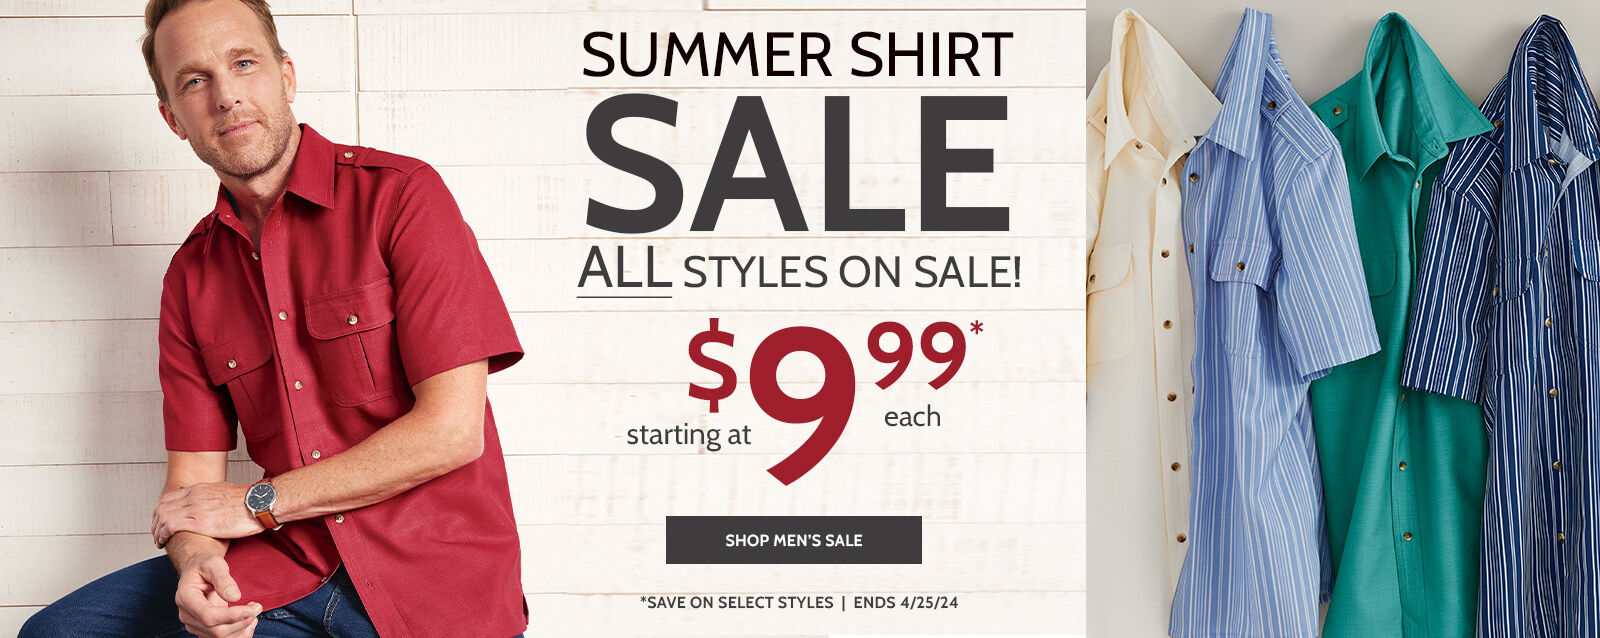 SUMMER SHIRT SALE all styles on sale! starting at $9.99* shop men's sale *save on select styles | ends 4/25/24